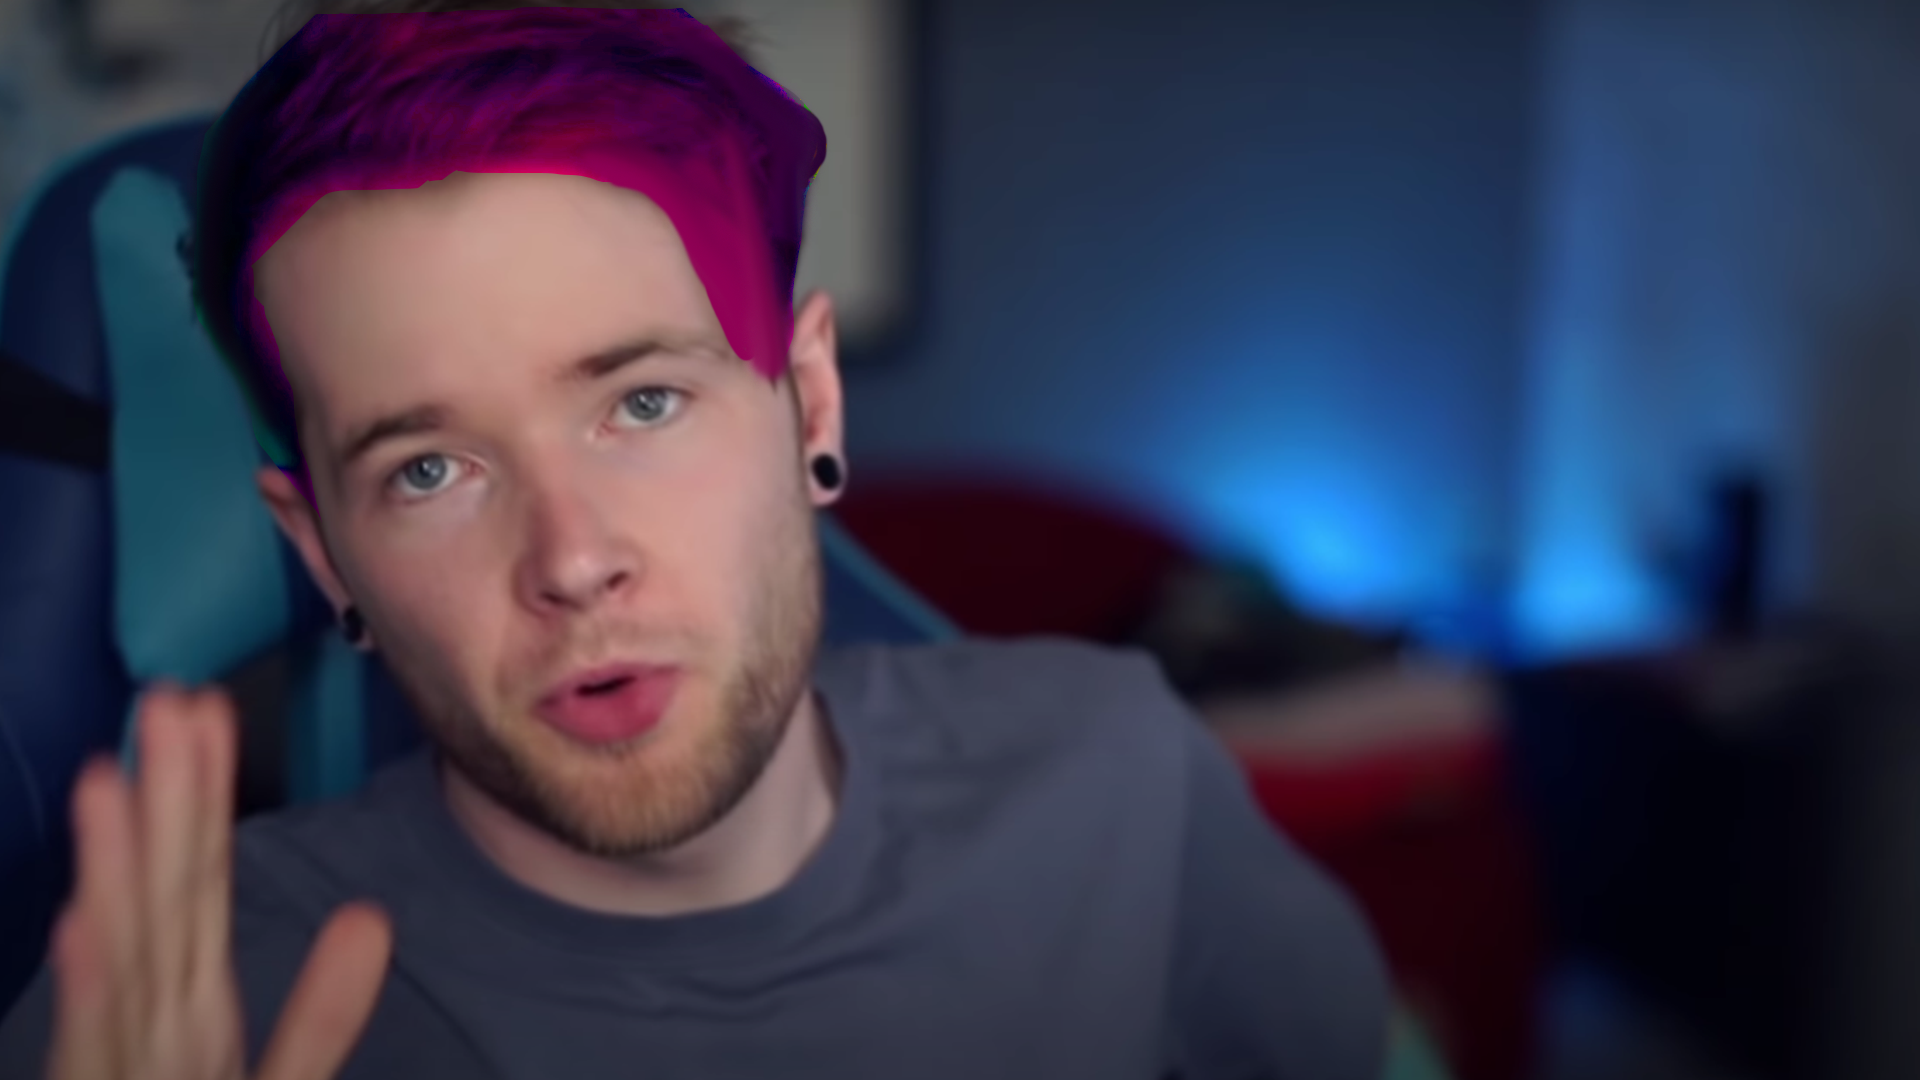 6. Dantdm's Signature Pink and Blue Hair Products - wide 4